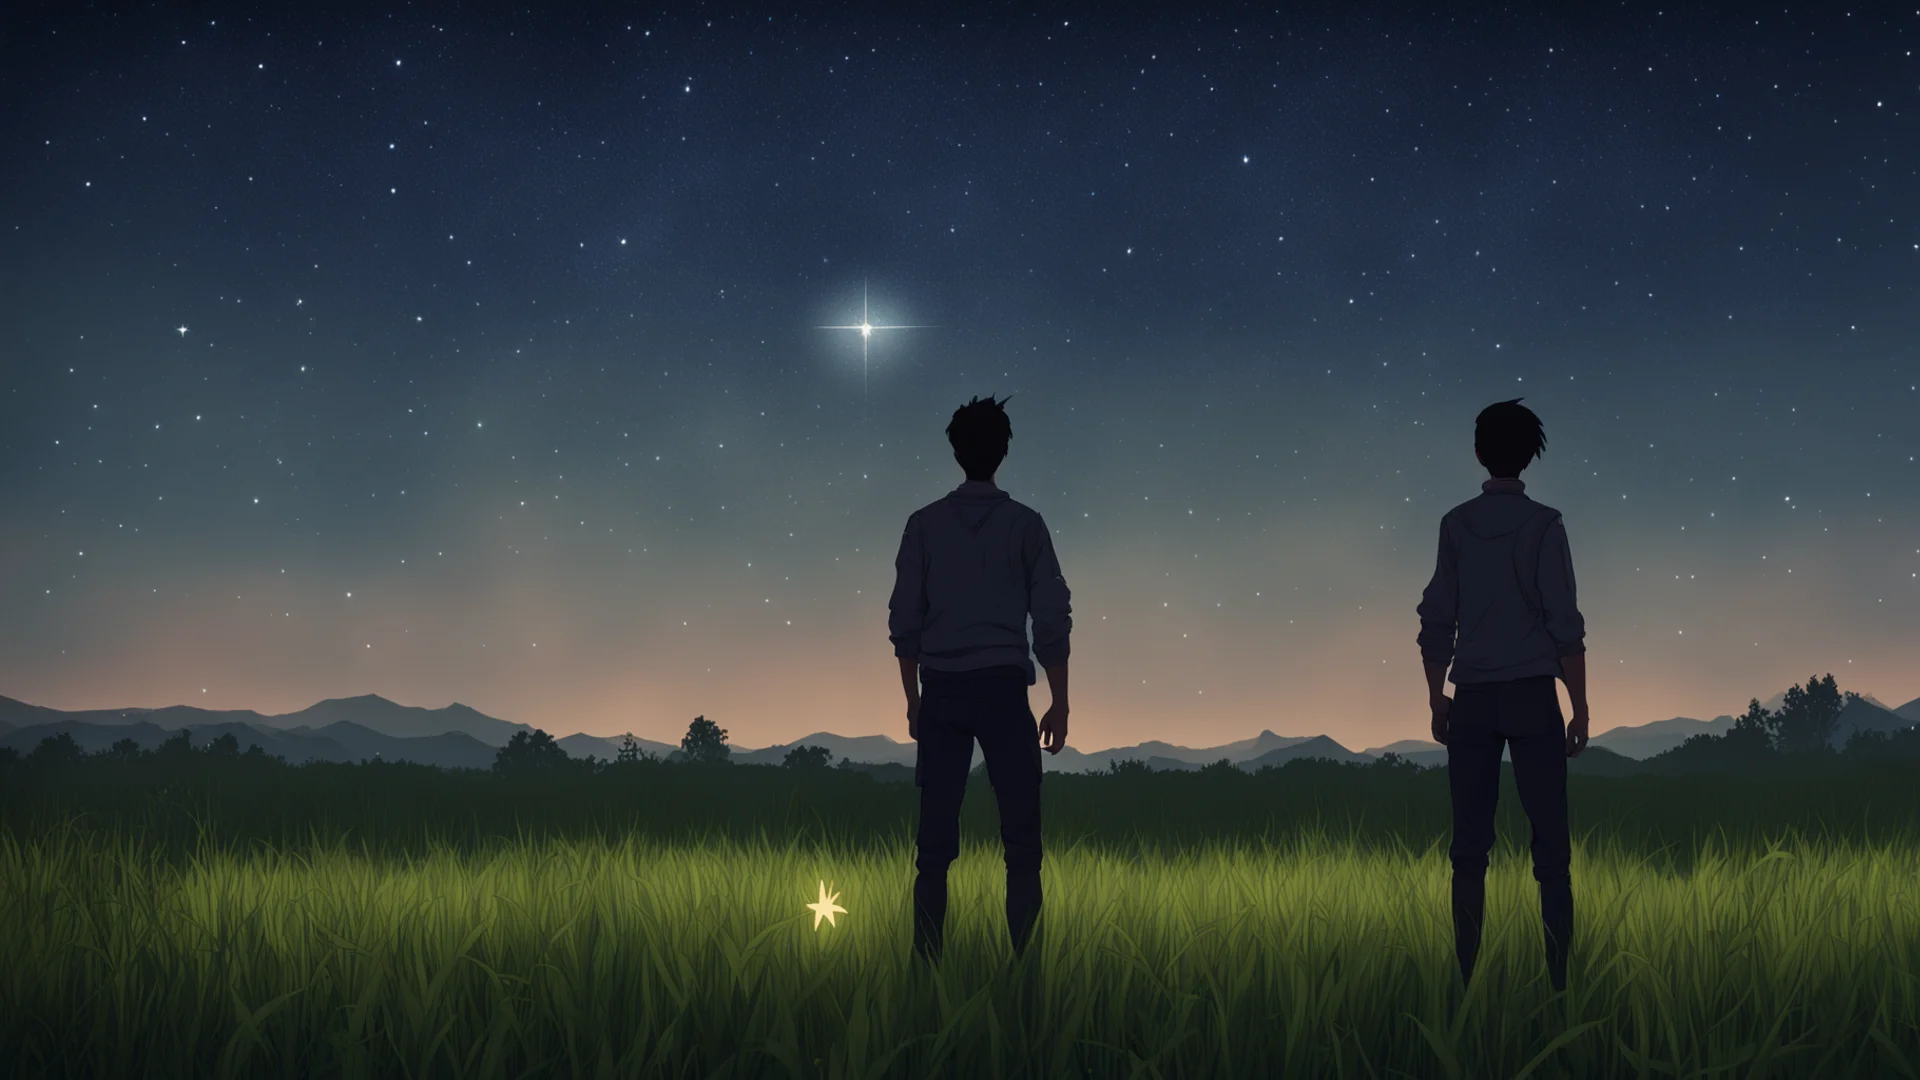 the player character stands with his back turned in a meadow at night with a star in the background wide